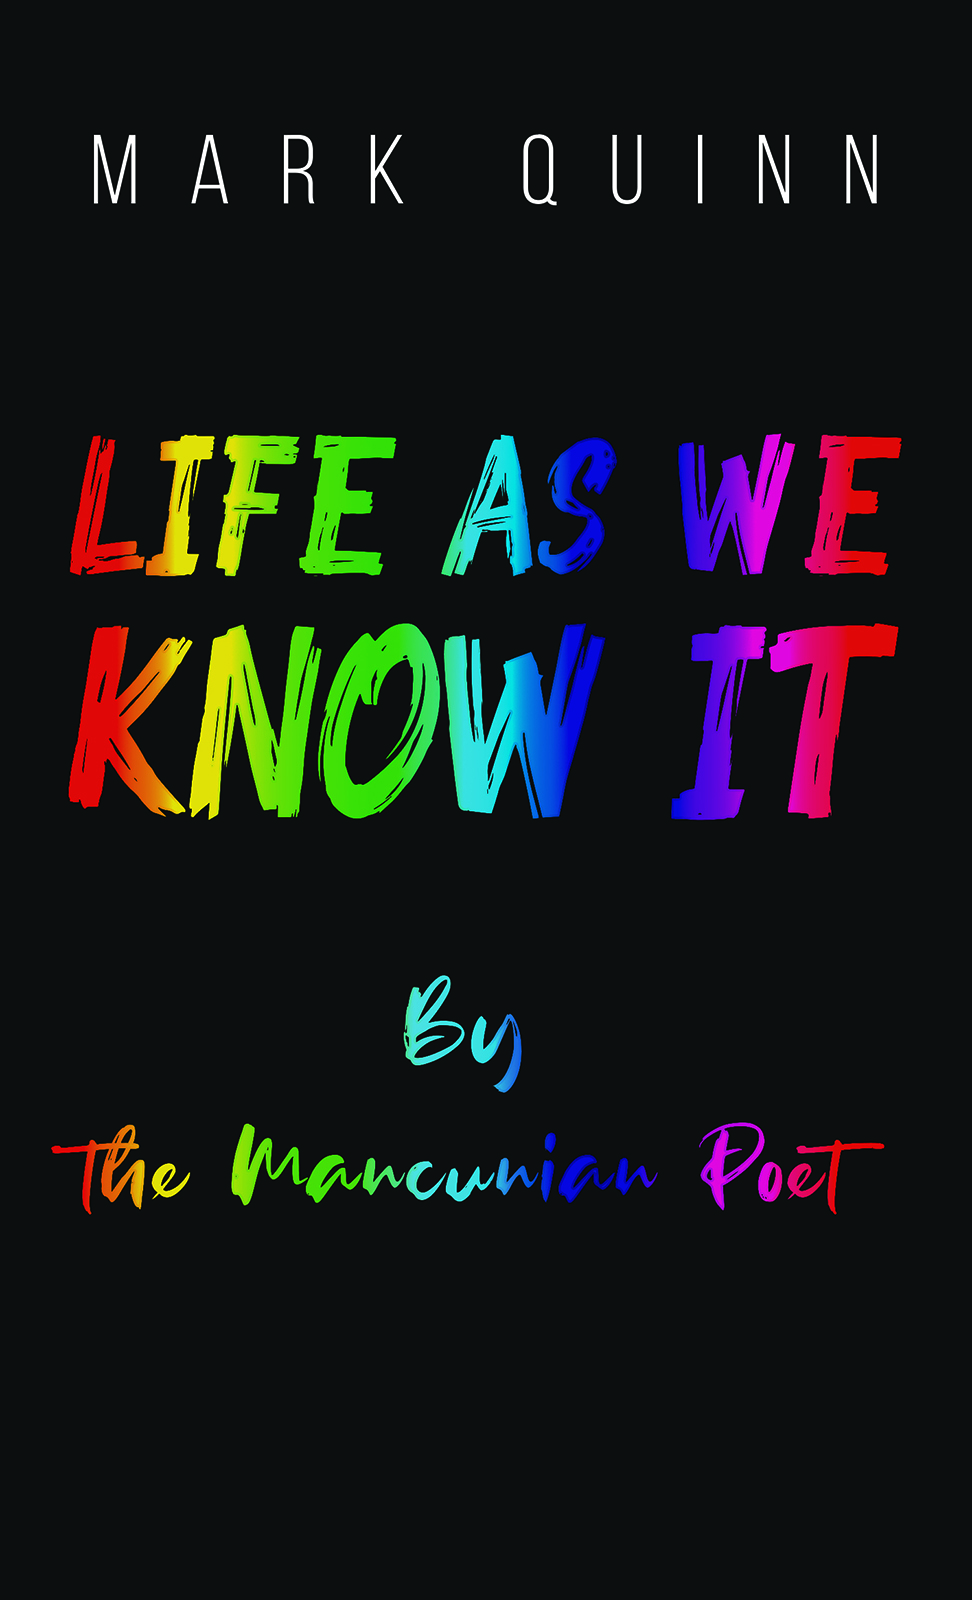 This image is the cover for the book Life as We Know It